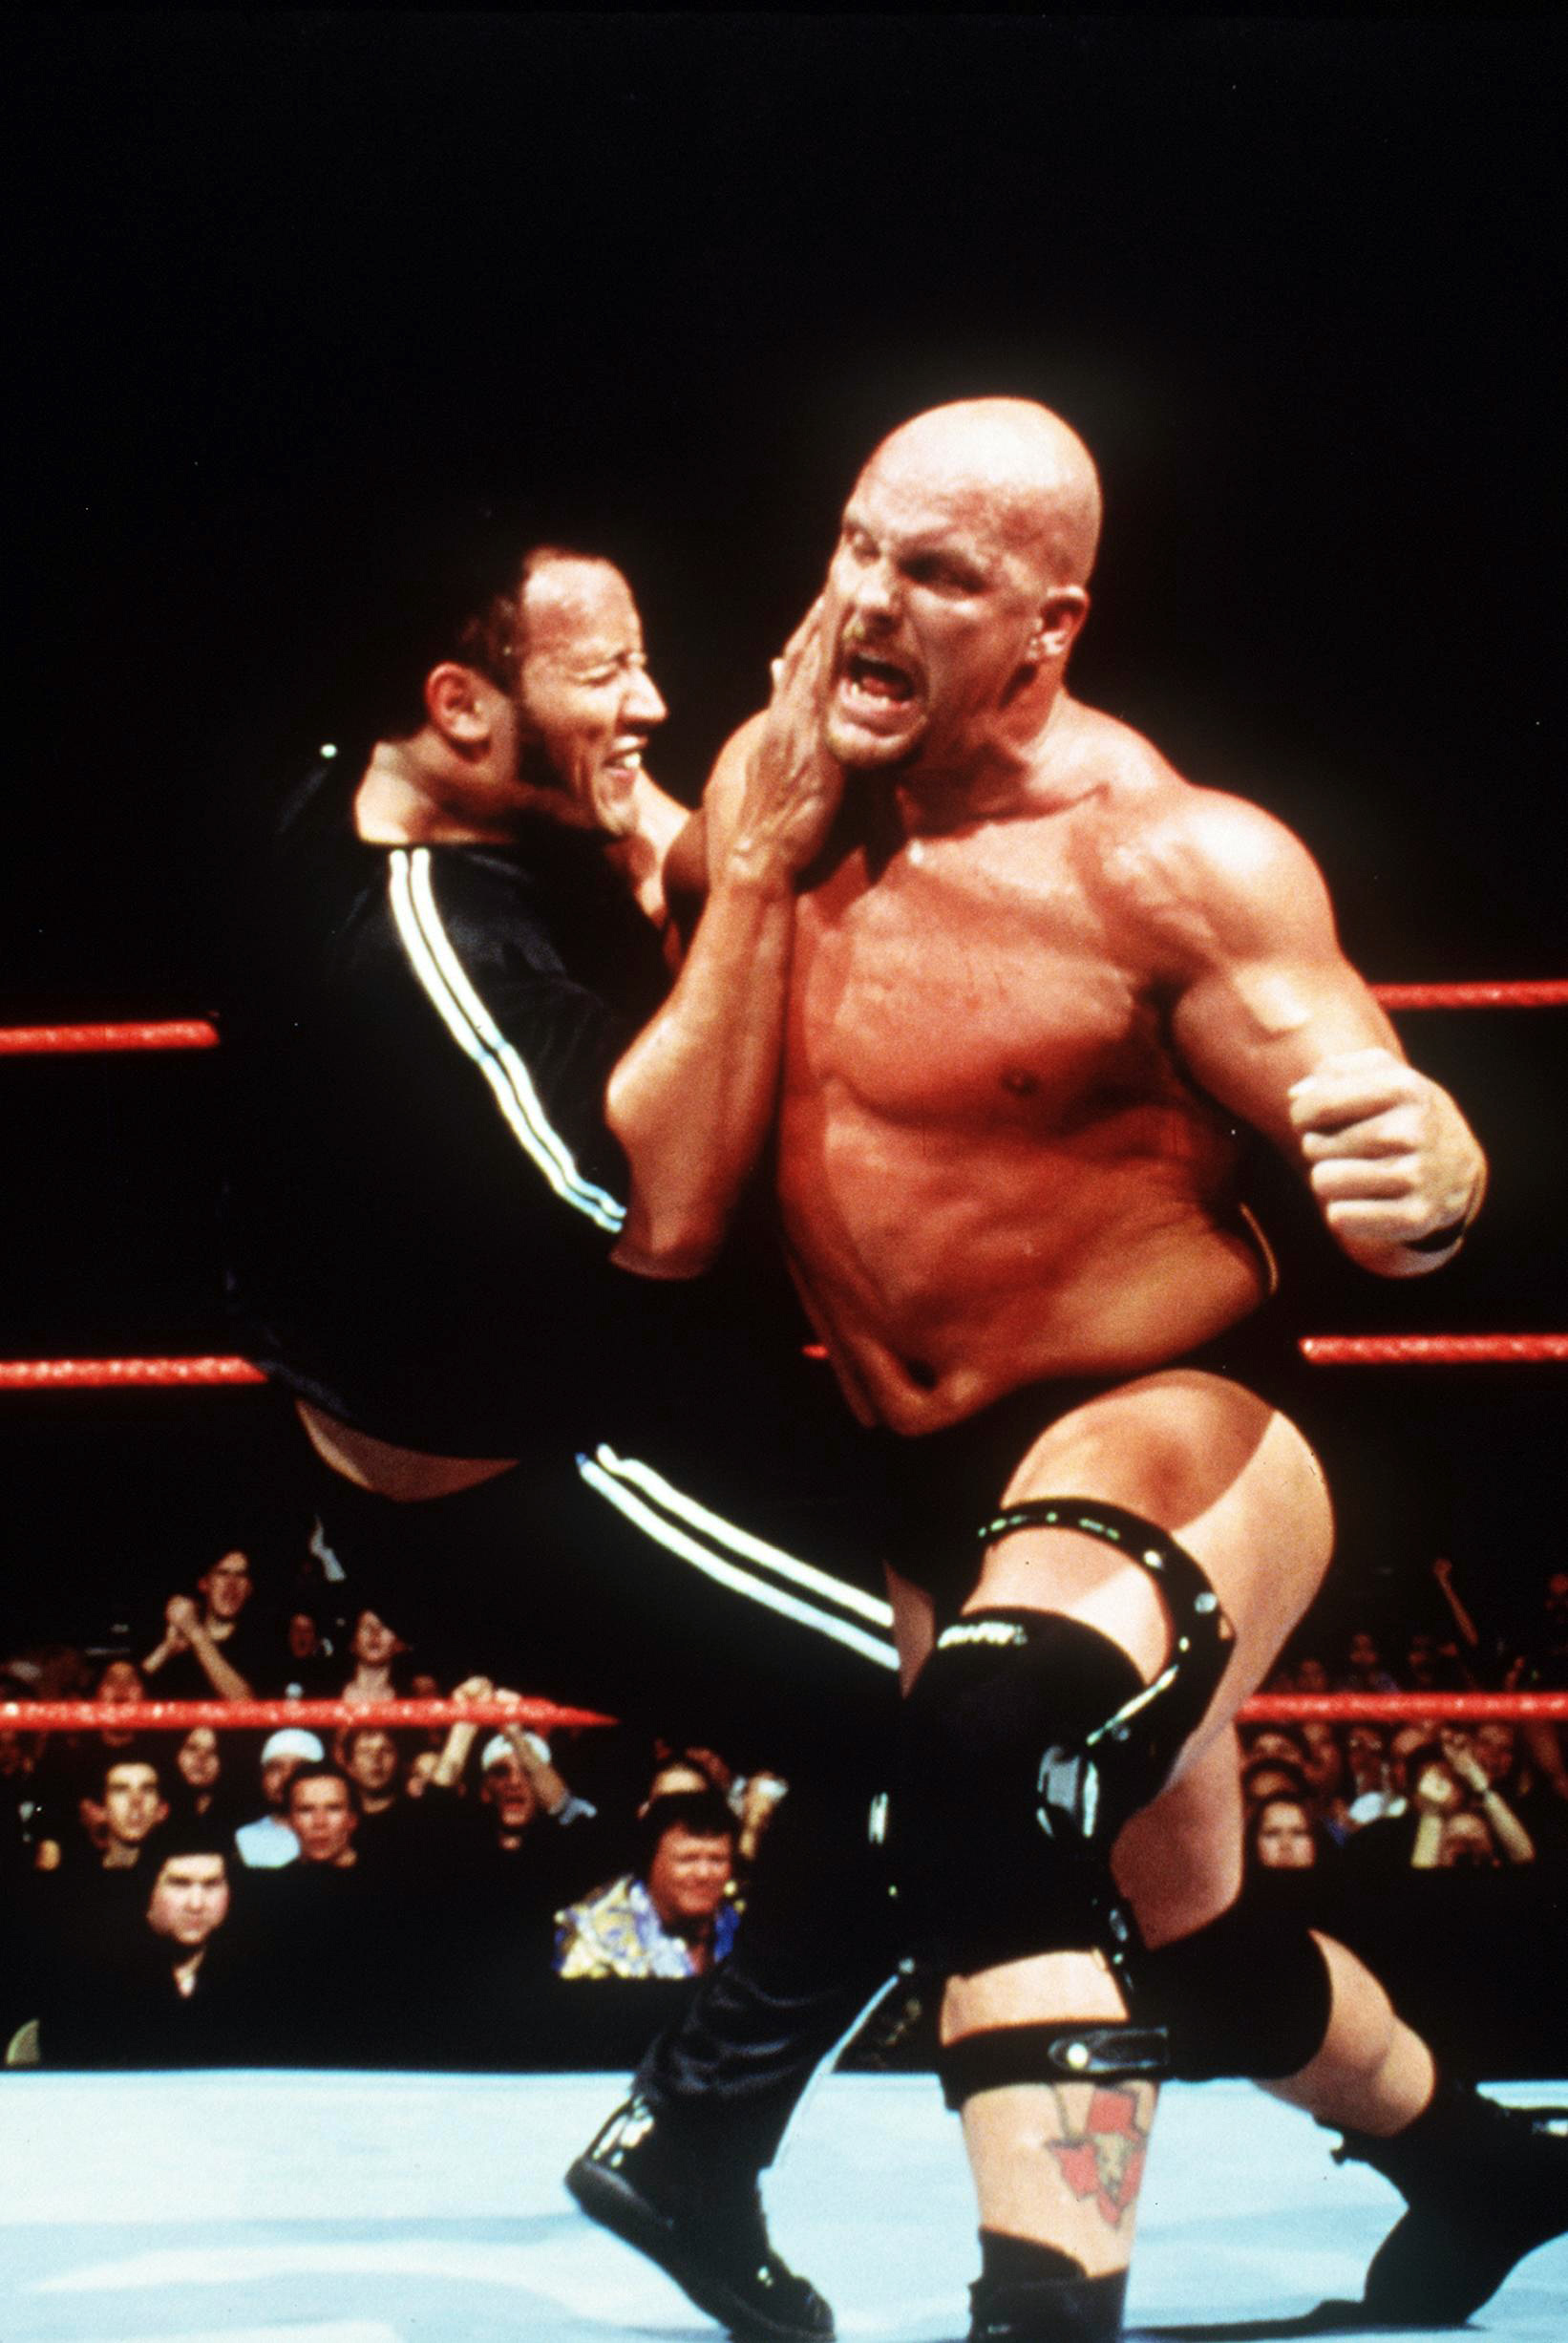 PHOTO: Dwayne "The Rock" Johnson and "Stone Cold" Steve Austin wrestle in "WWF Smackdown."